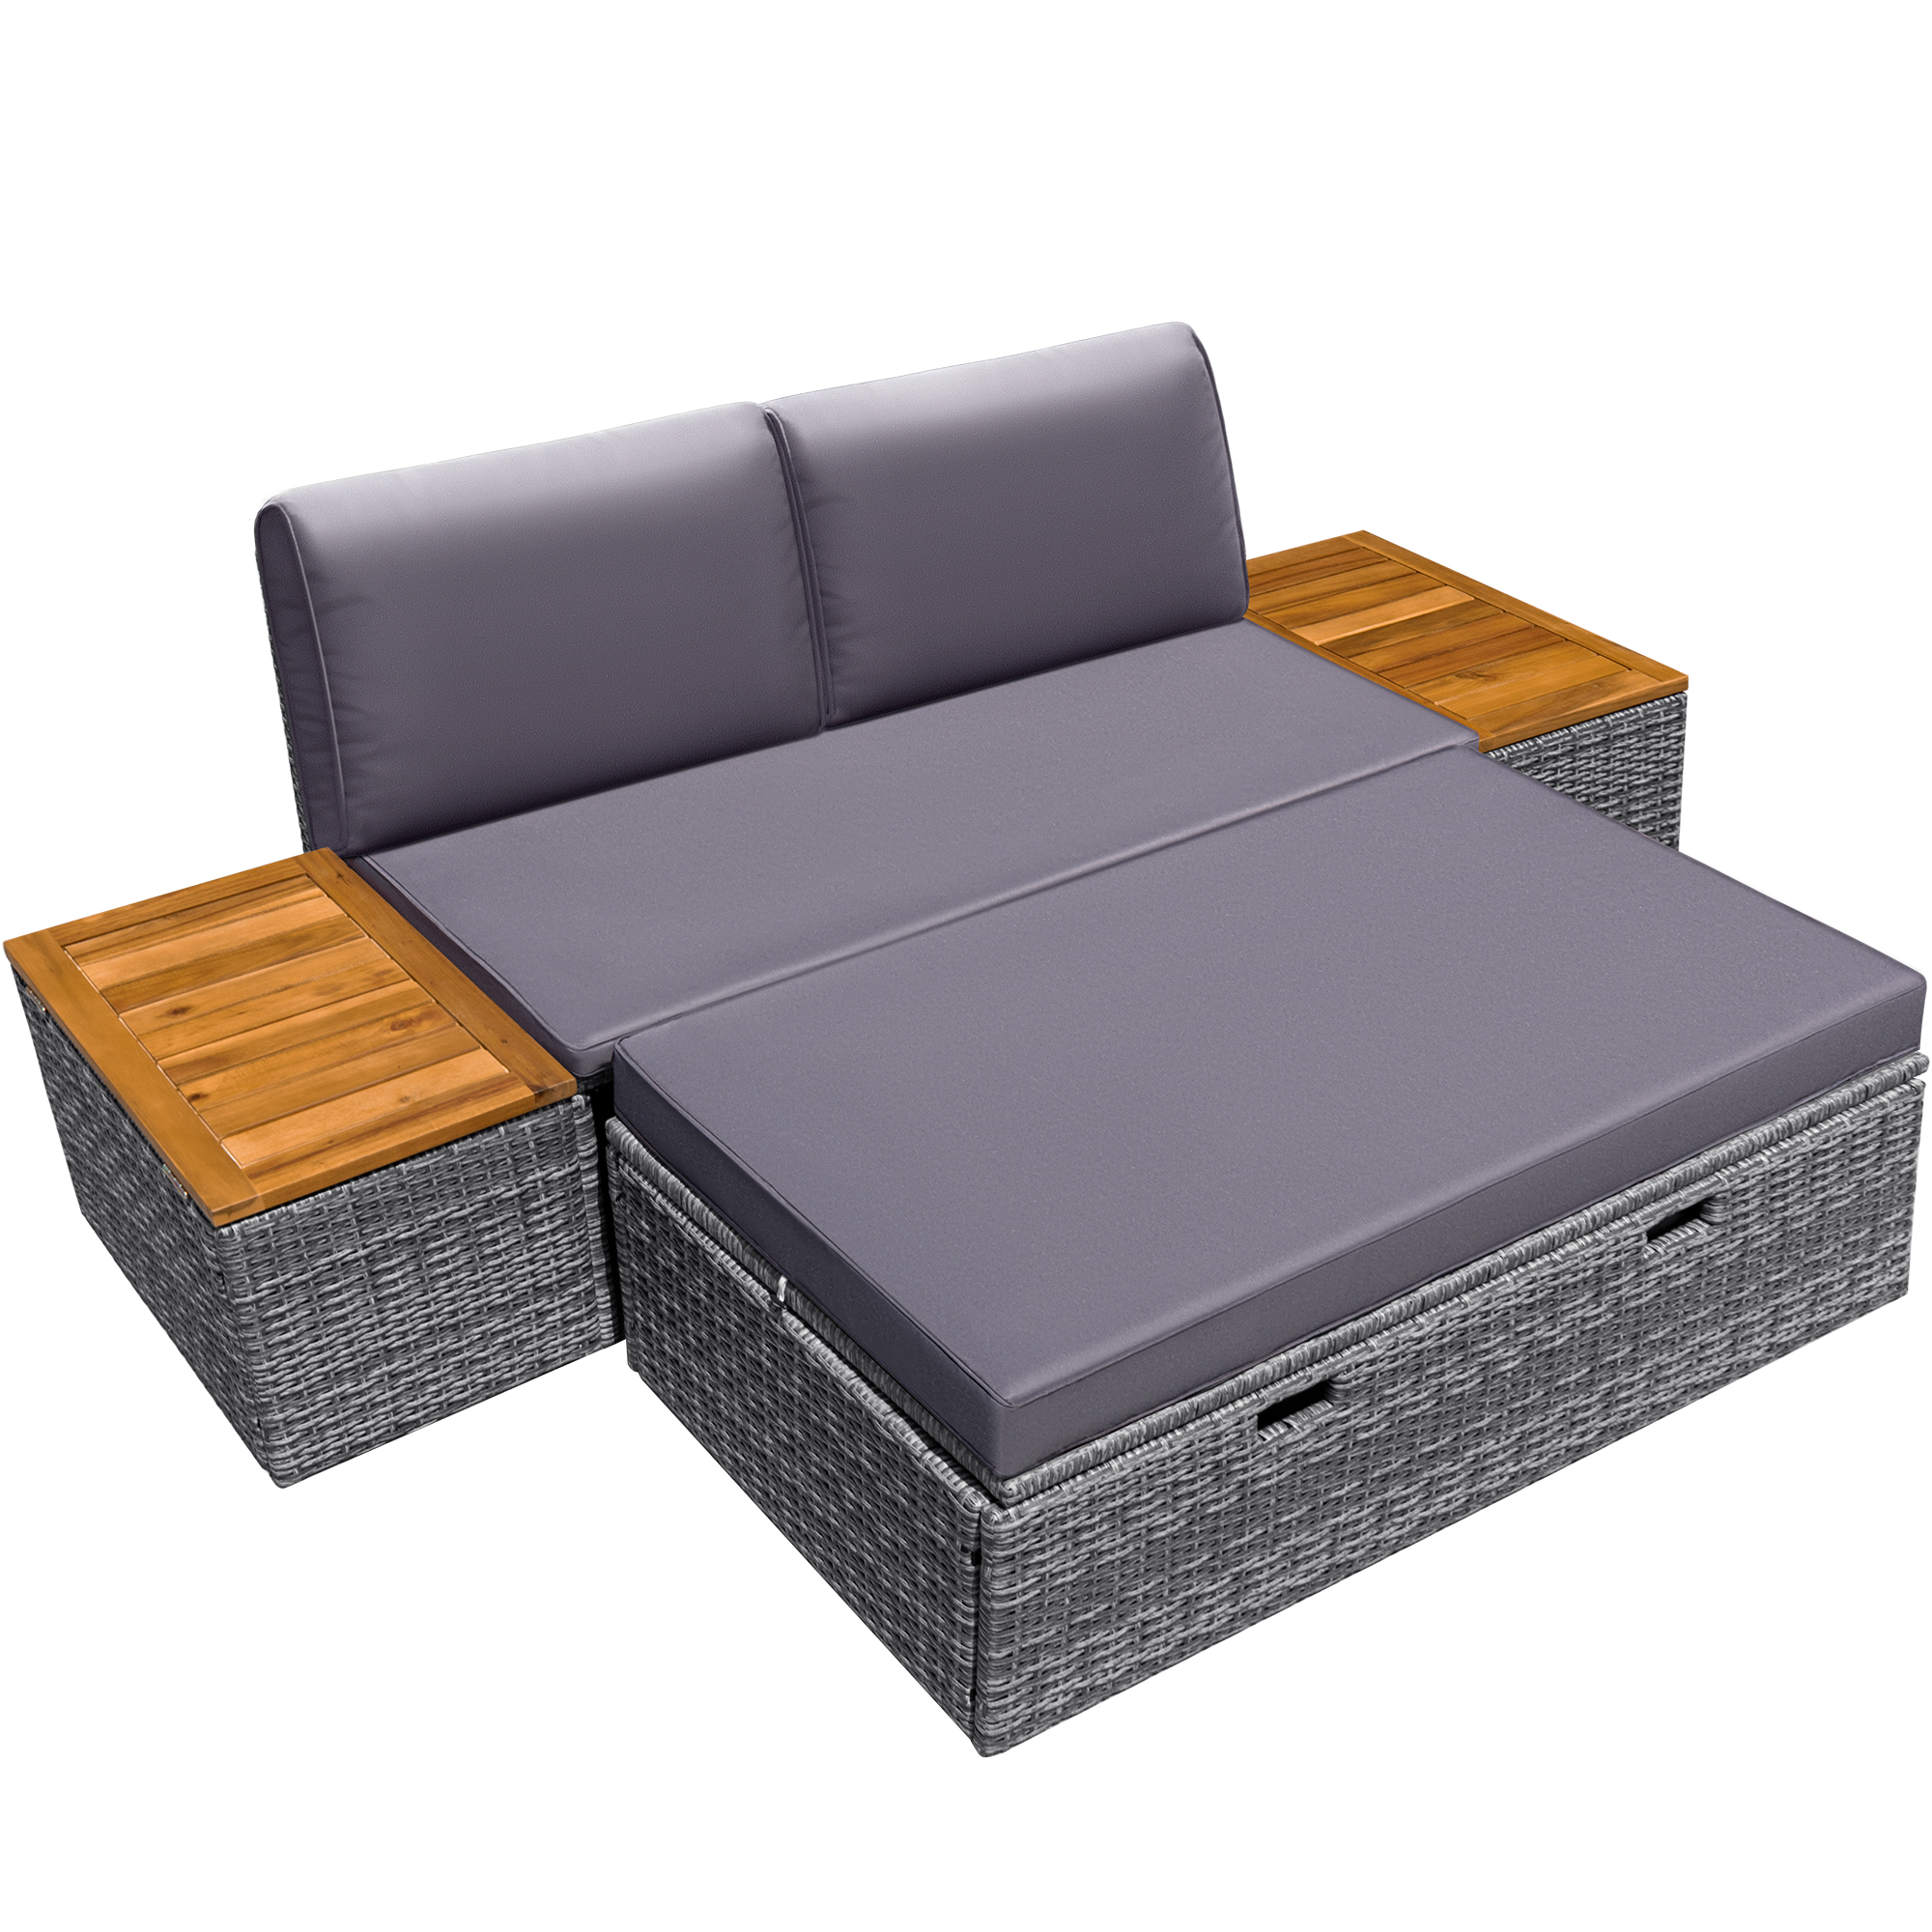 Homall Outdoor Daybed Patio Furniture Set Rattan Storage Daybed with Cushion and Side Table, Gray - image 2 of 8